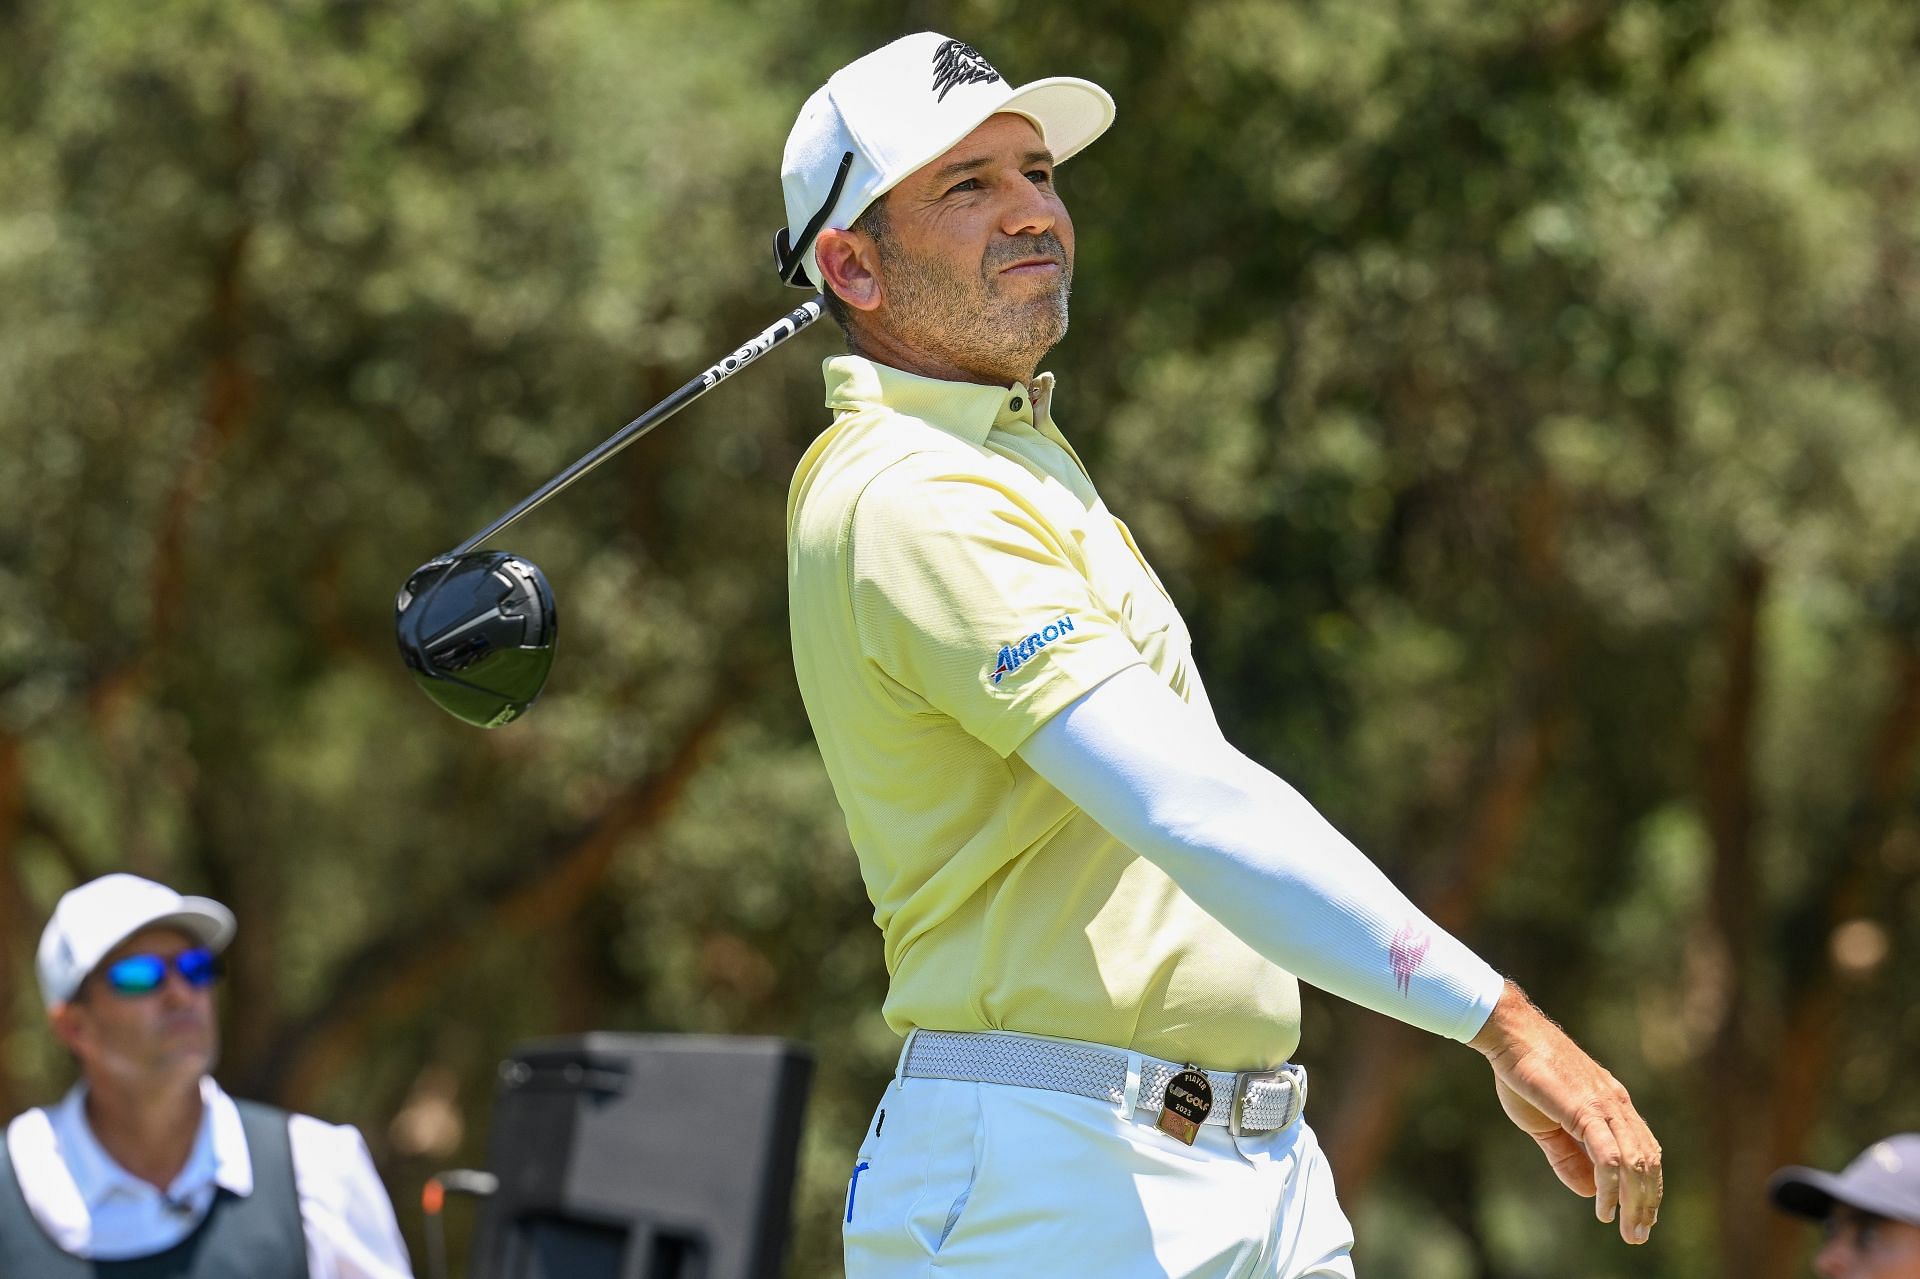 Sergio Garcia teeing off at the 7th hole of the LIV Golf - Andalucia (Image via Getty).